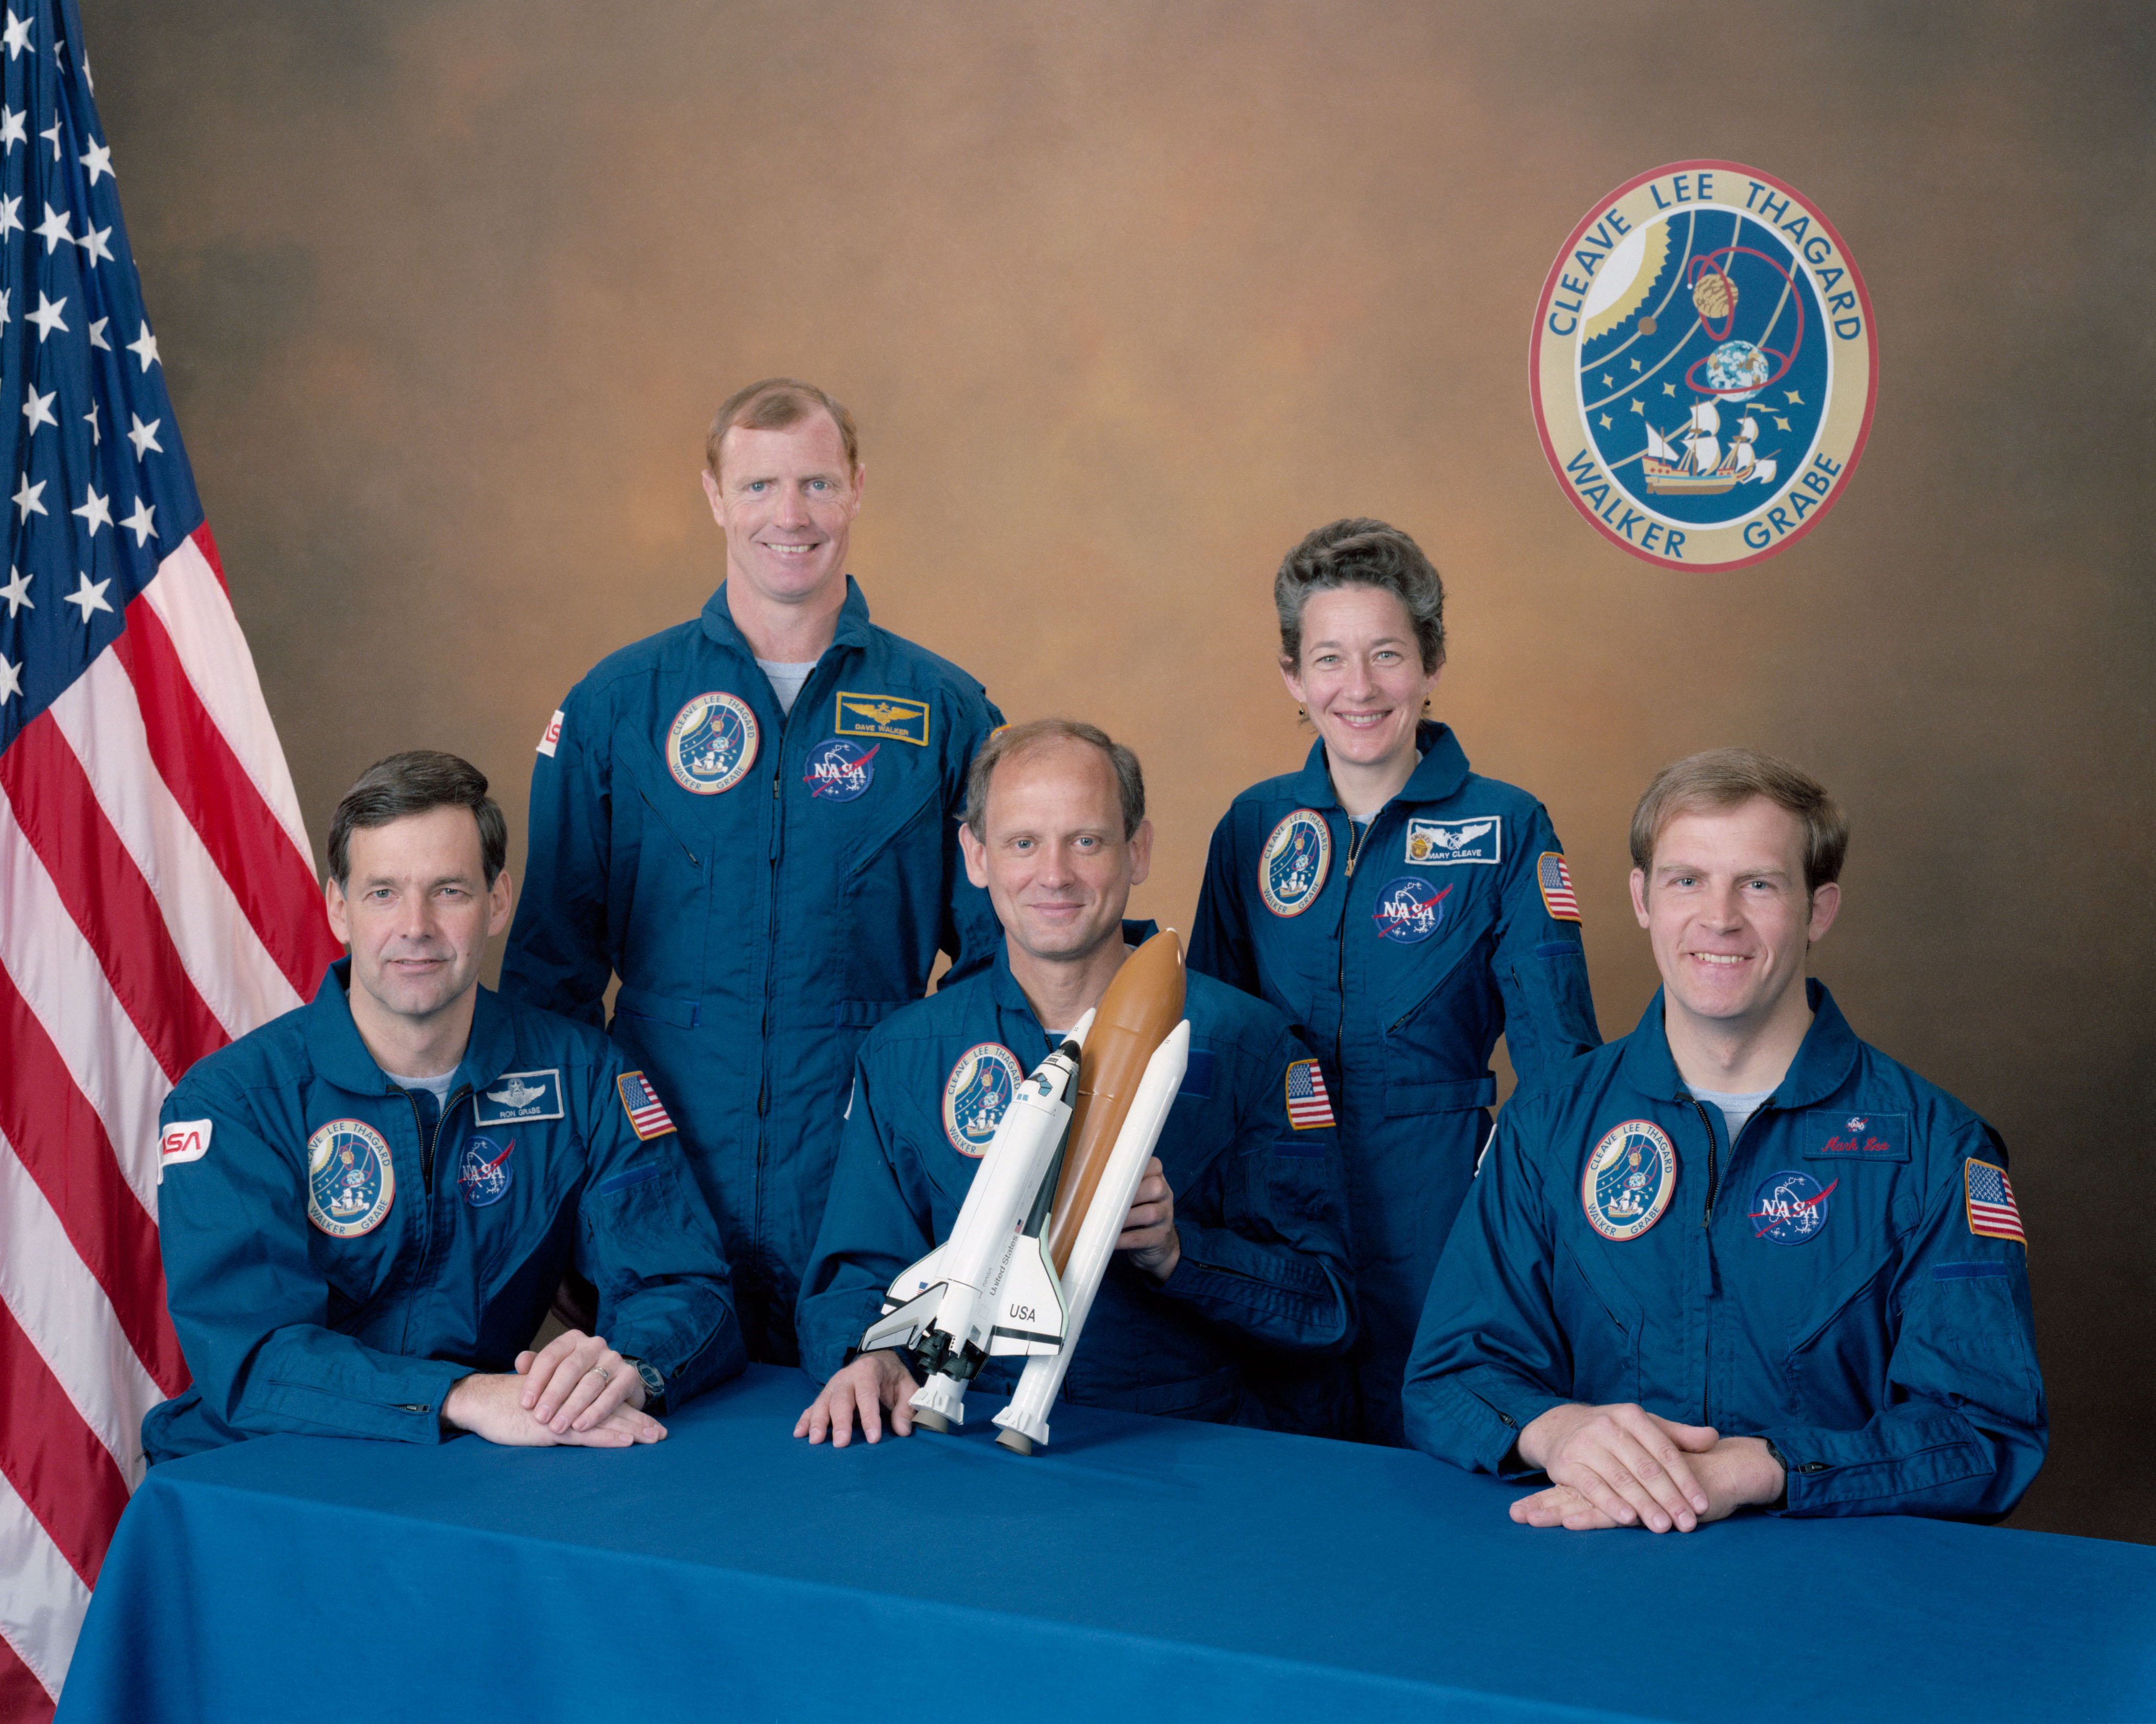 The STS-30 crew of Pilot Ronald J. Grabe, left, Commander David M. Walker, and Mission Specialists Norman E. Thagard, Mary L. Cleave, and Mark C. Lee